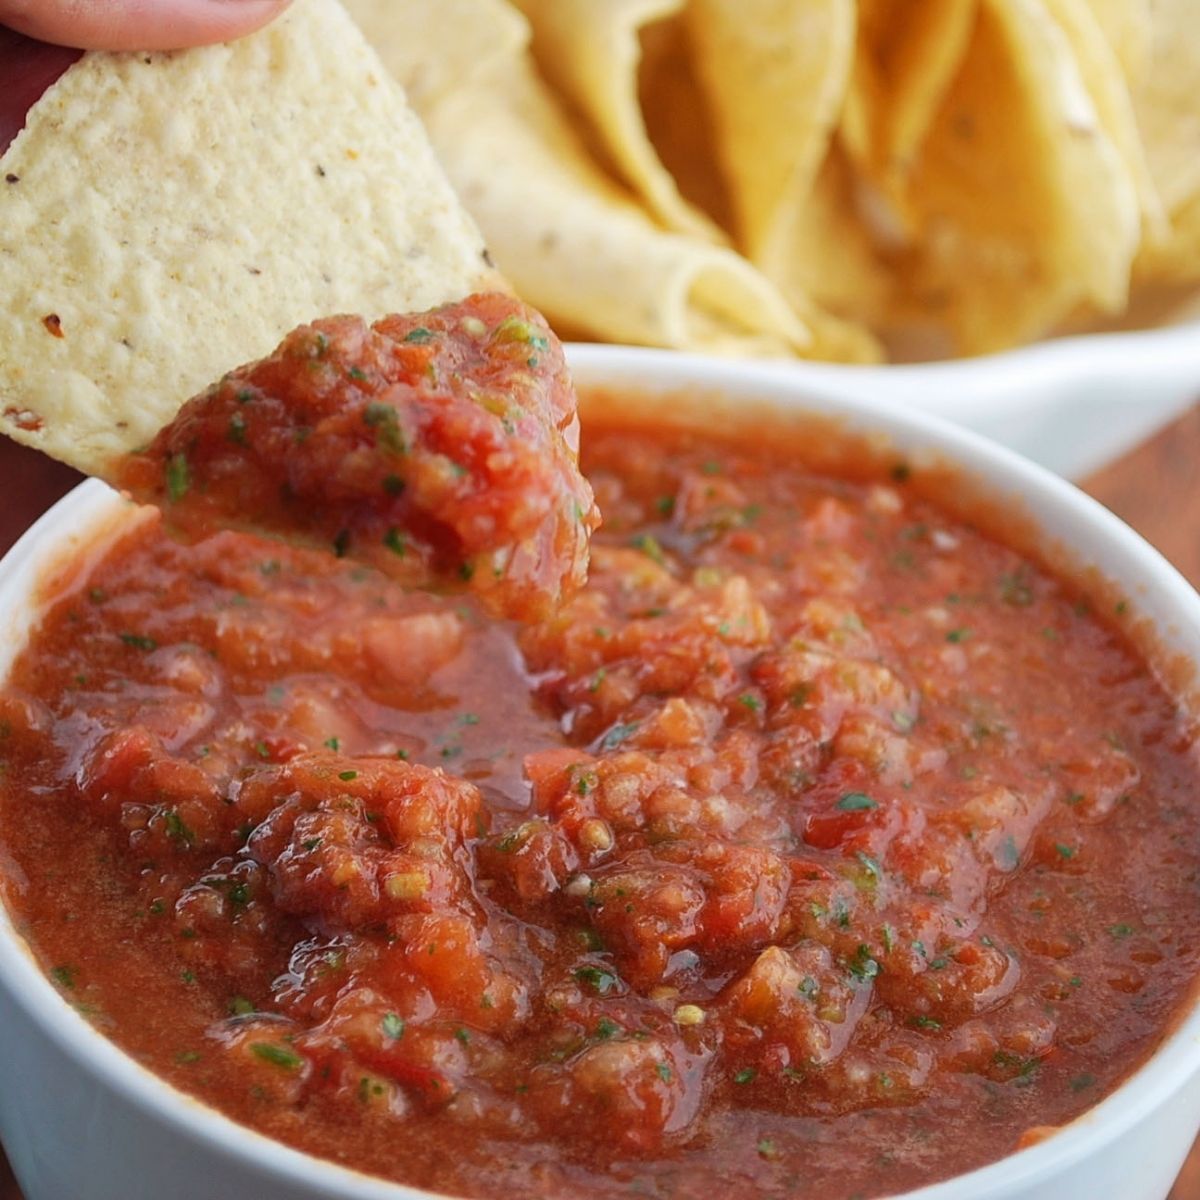 close up photo of a tortilla chip being dipped in salsa